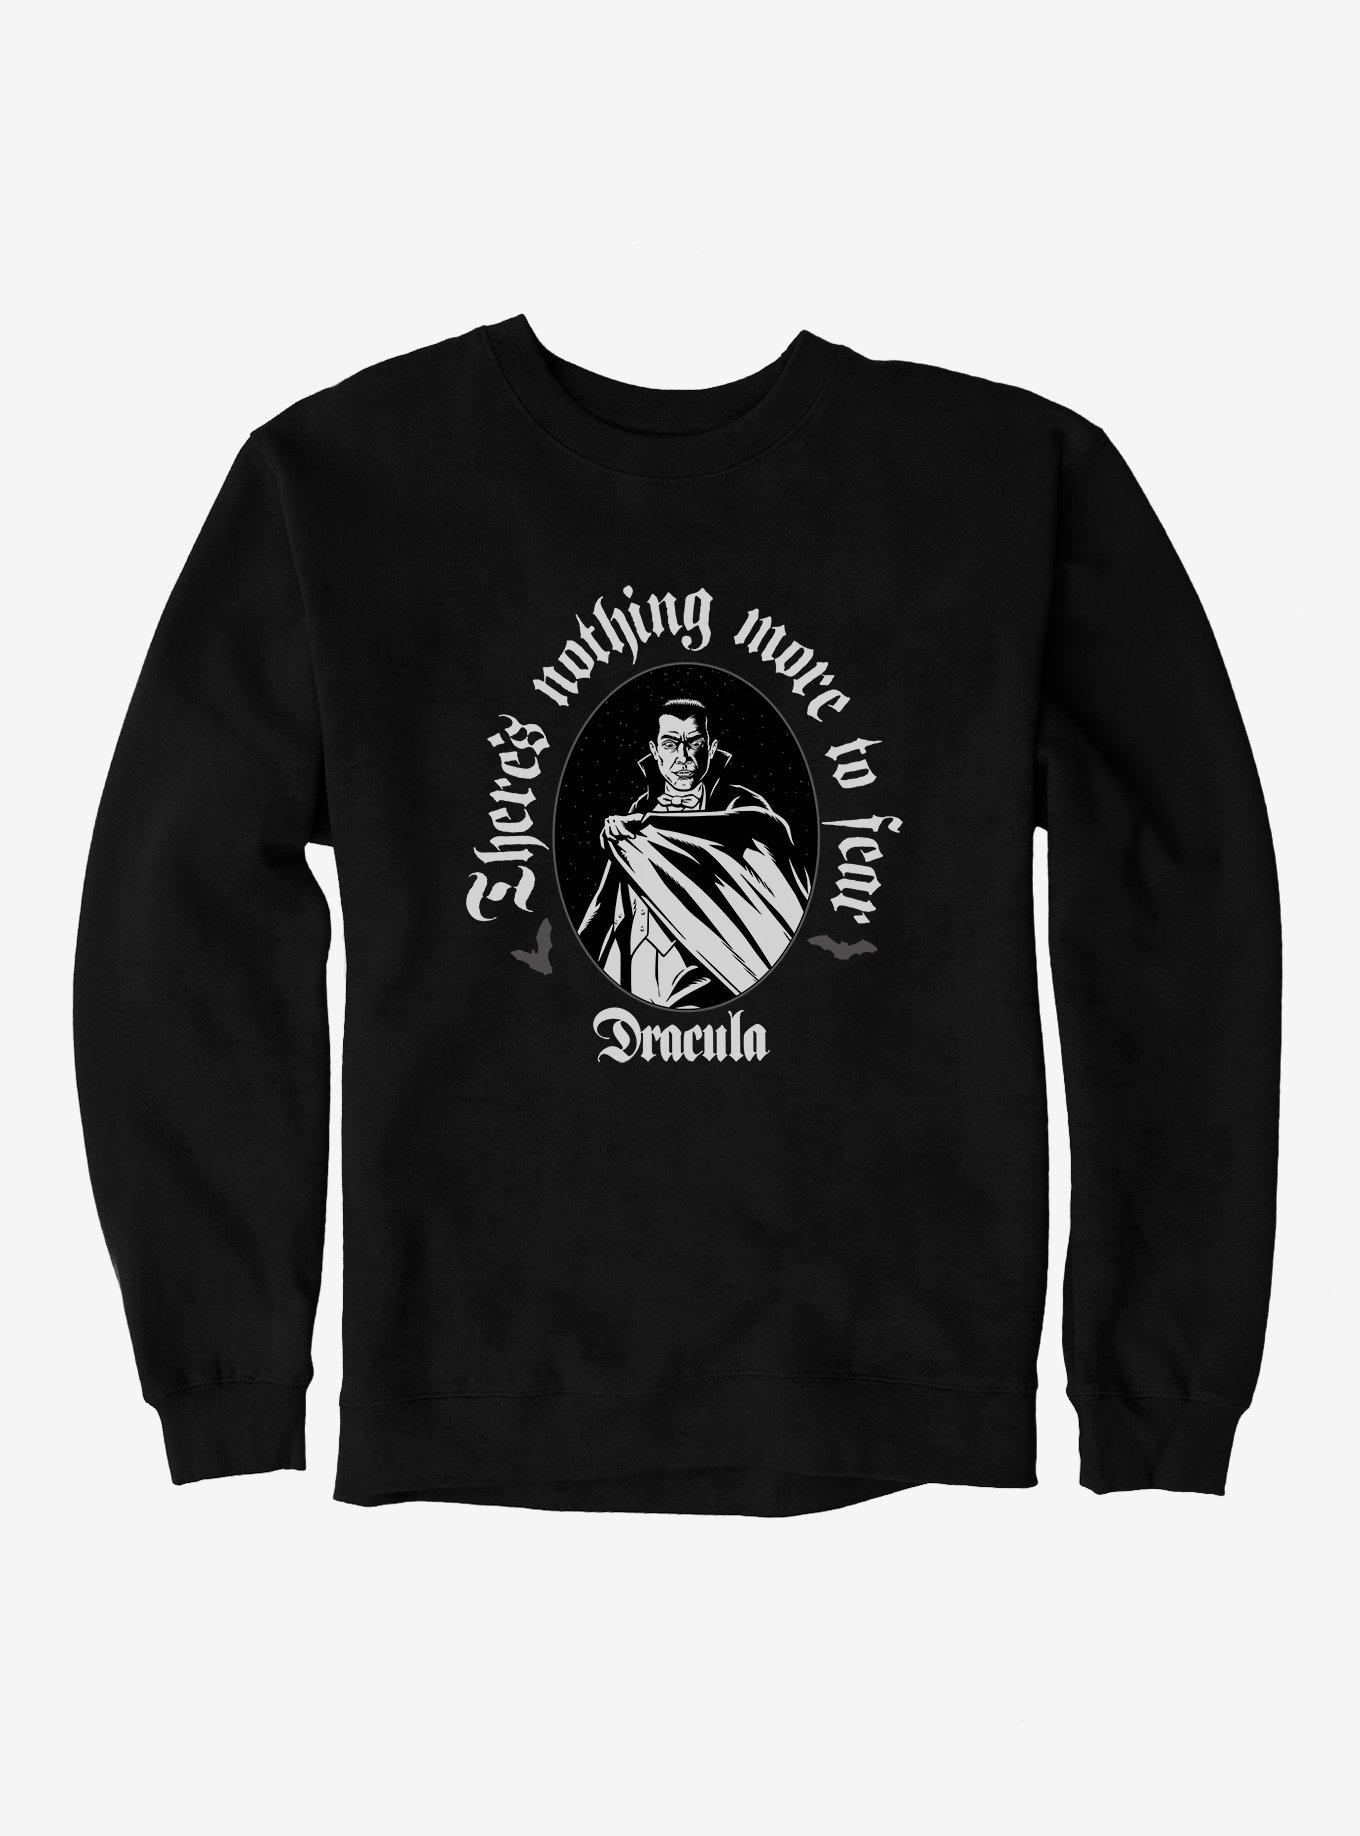 Universal Monsters Dracula There's Nothing More To Fear Sweatshirt, BLACK, hi-res